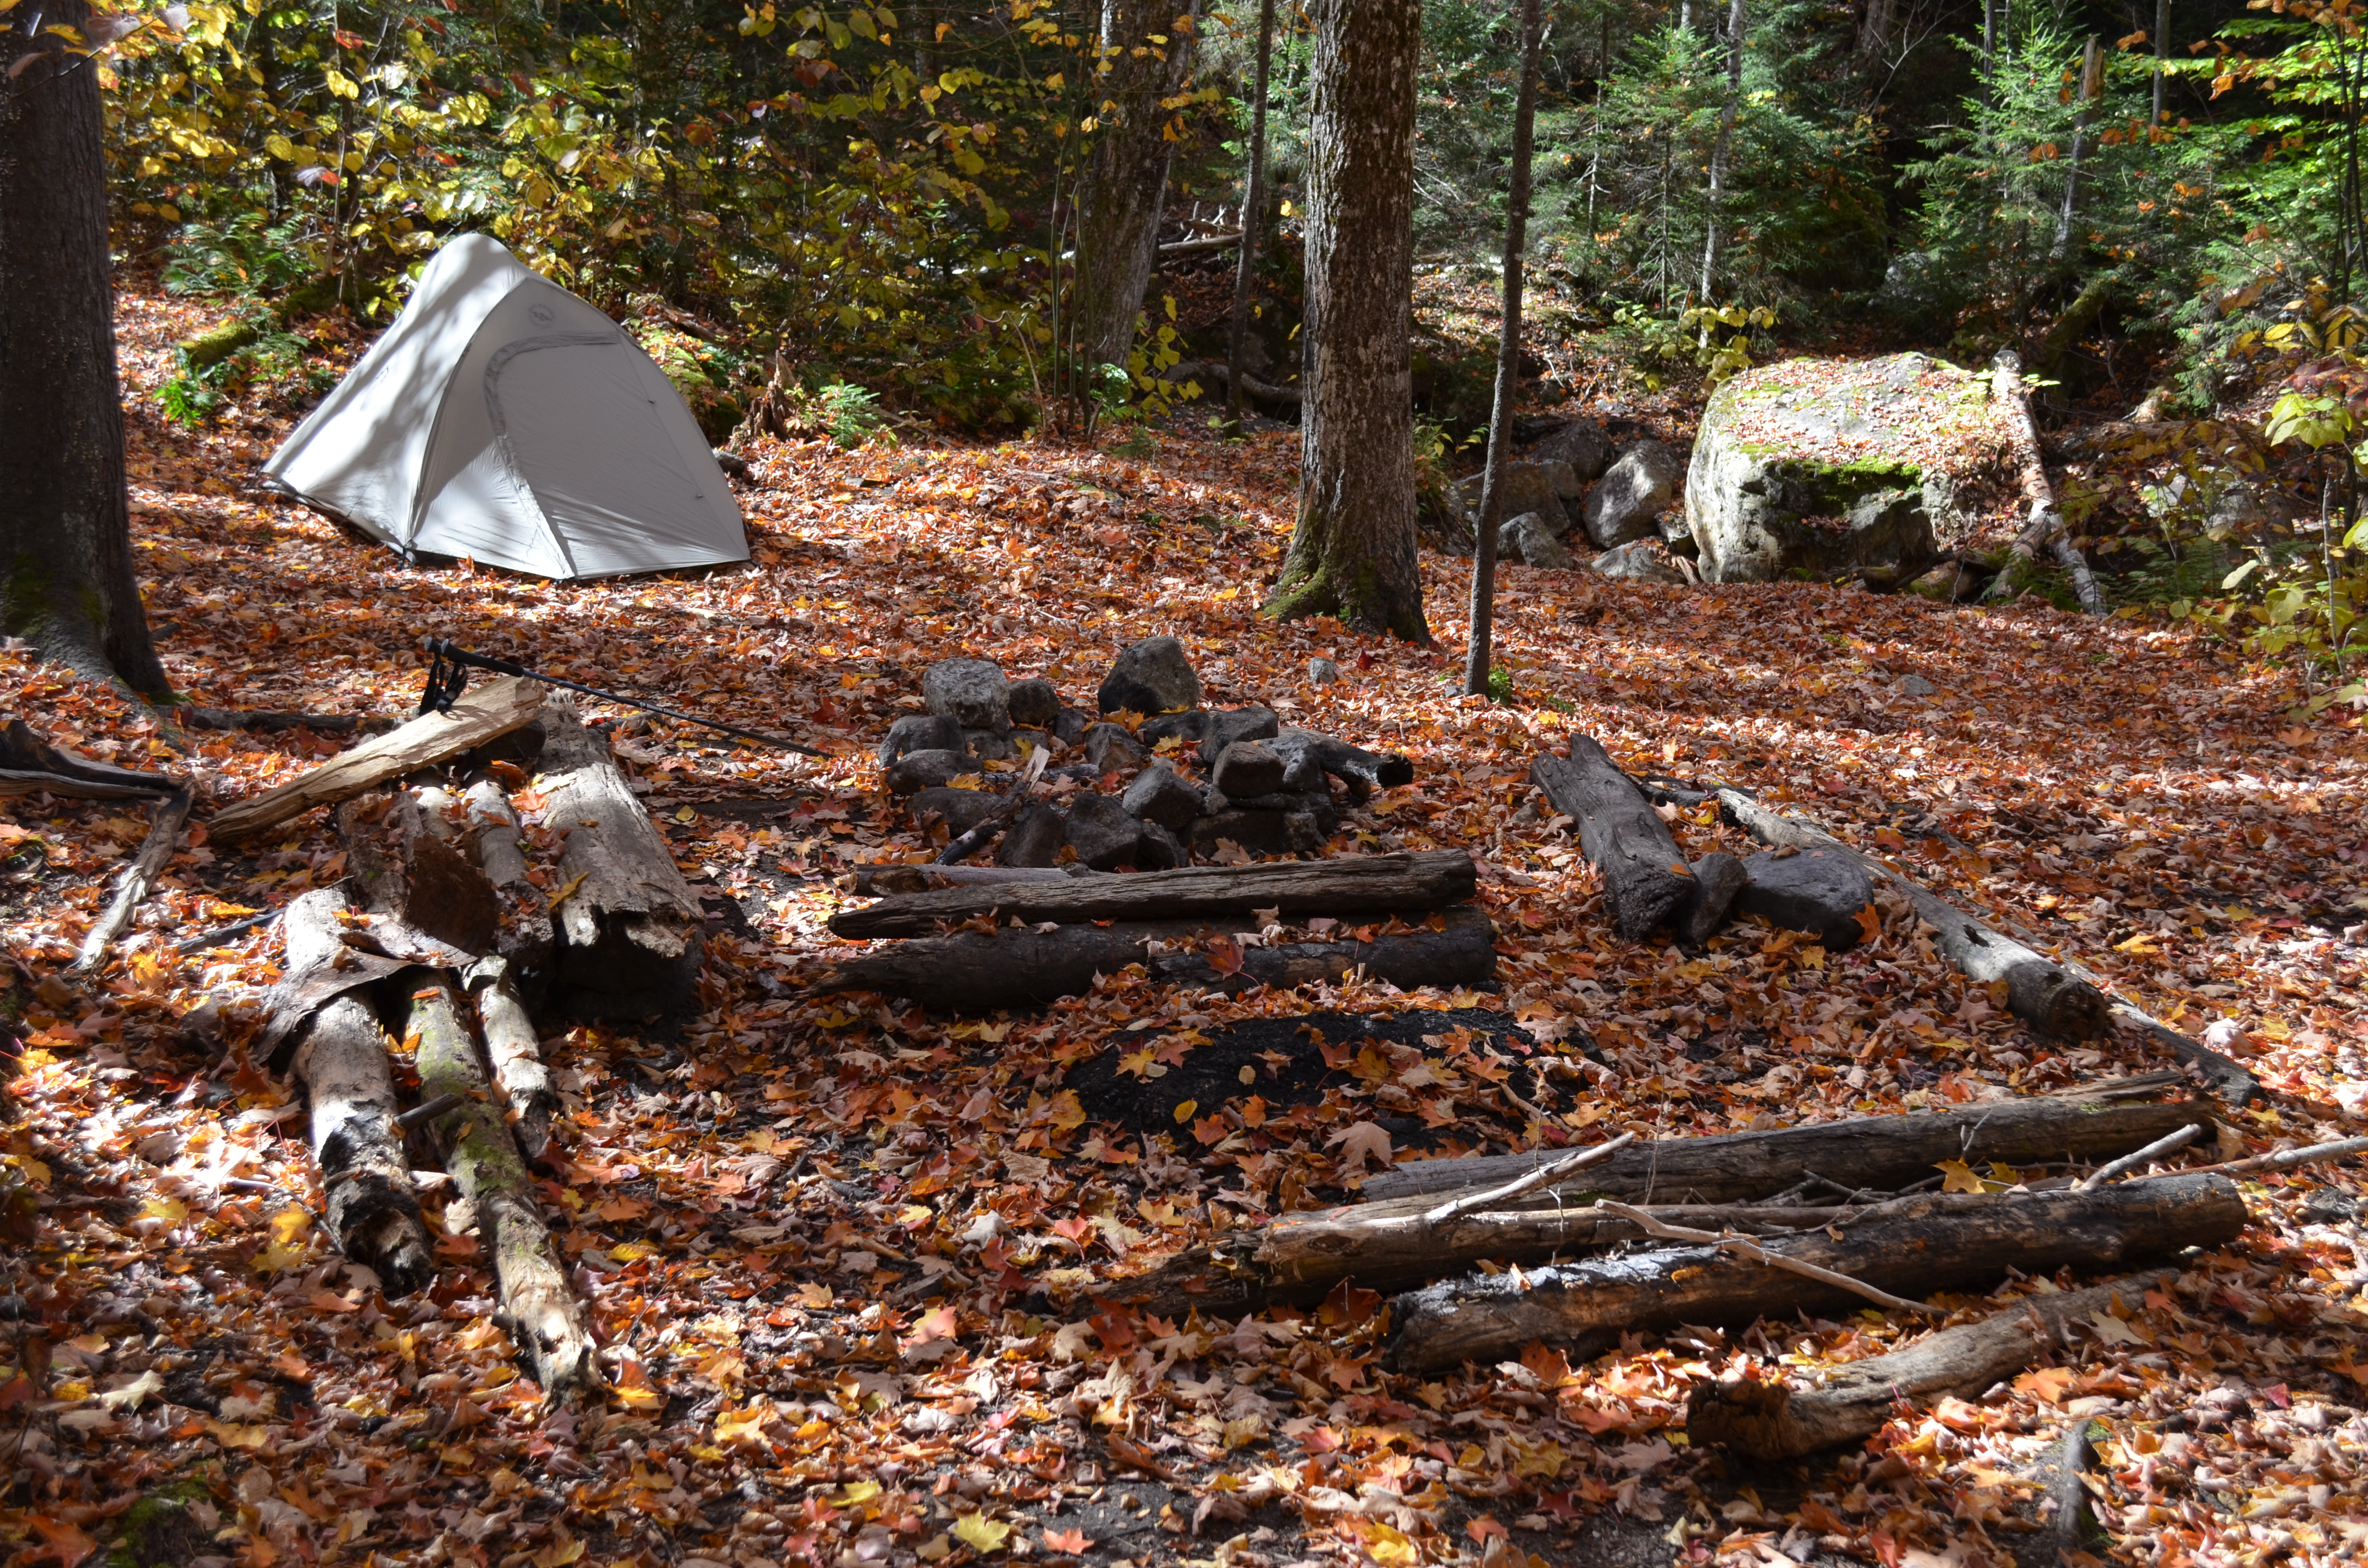 site #1, legal fire area and my tent